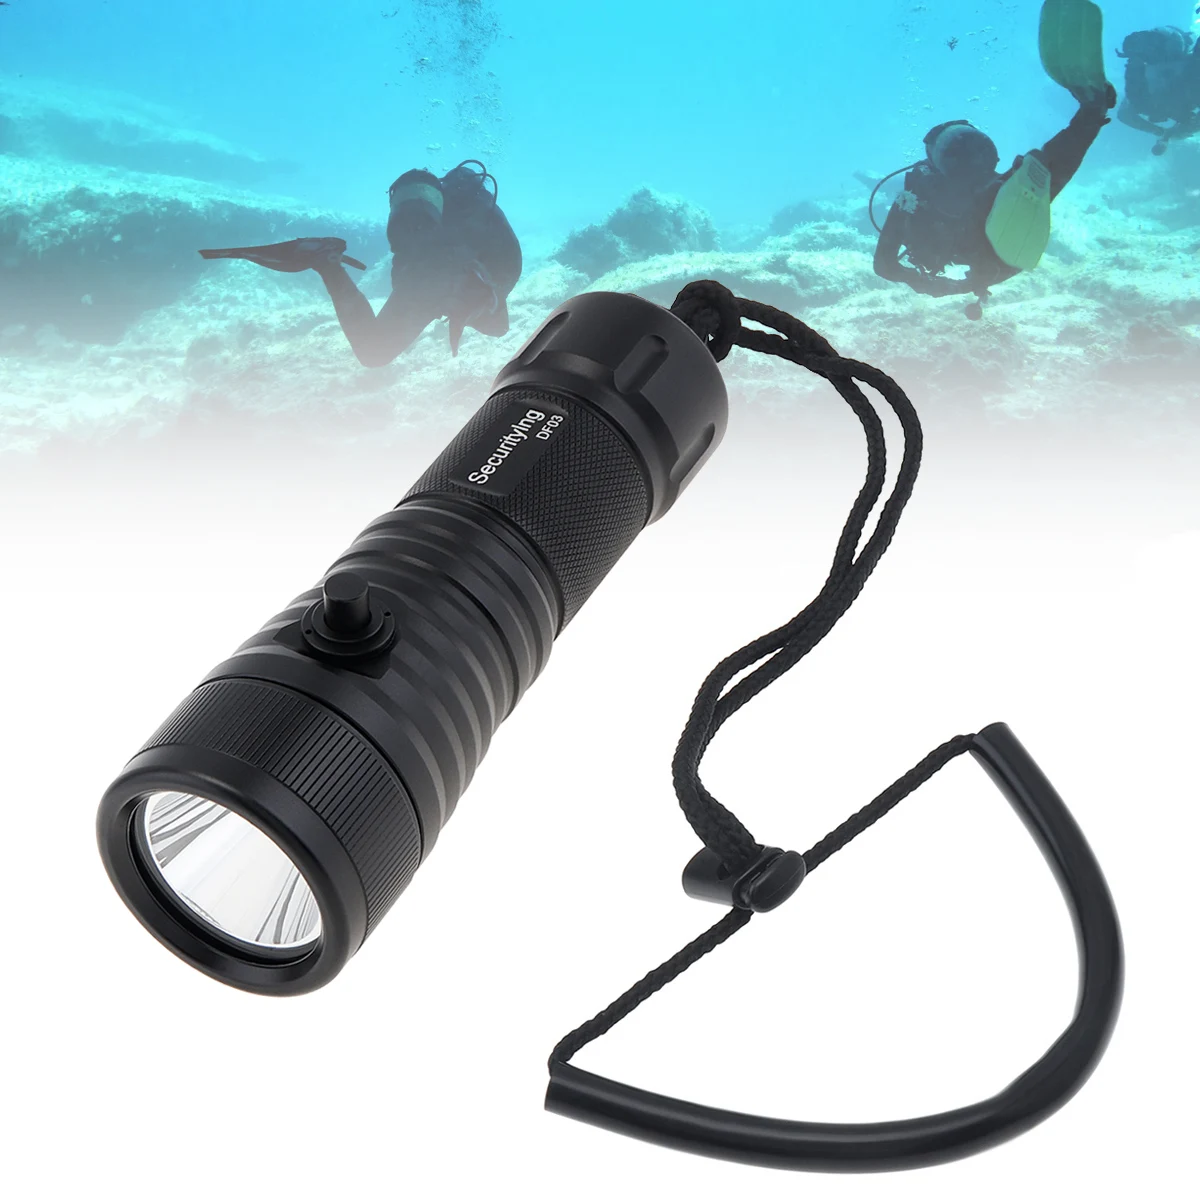 Enlarge SecurityIng 3000 Lumen Diving Flashlight SST70 LED  Underwater 150M with 9 Degrees Narrow Beam IP68 Waterproof Scuba Dive Torch